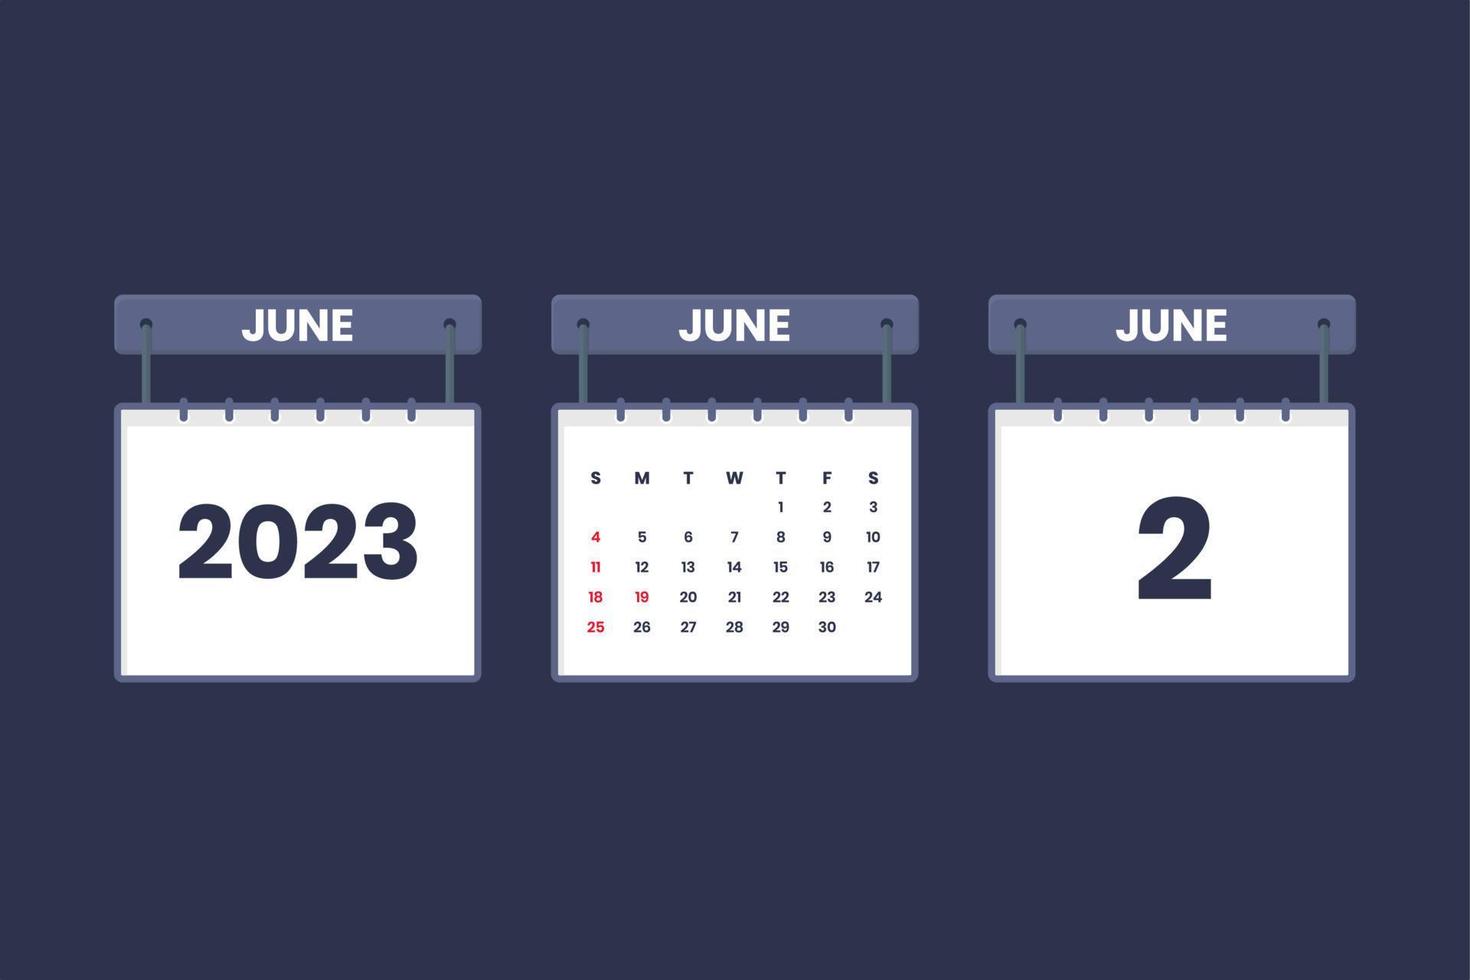 2 June 2023 calendar icon for schedule, appointment, important date concept vector